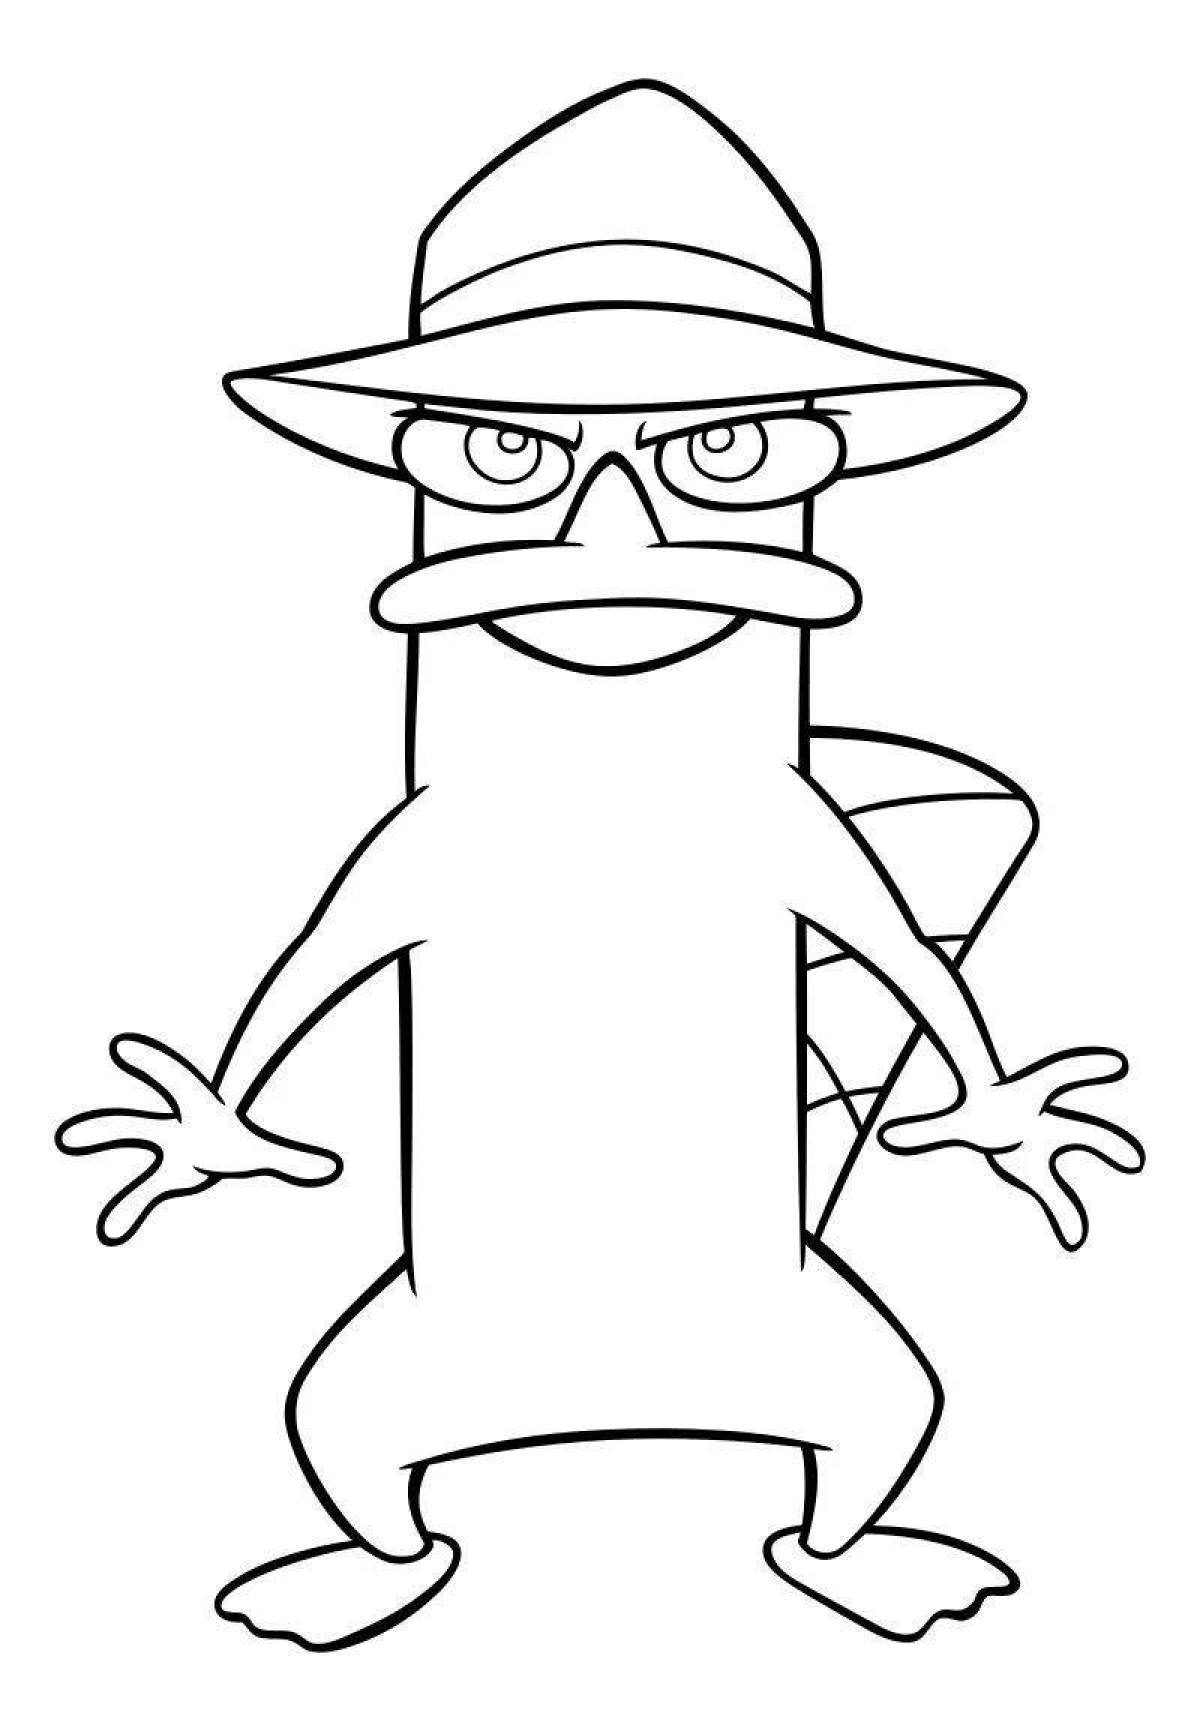 Happy Perry's platypus coloring page